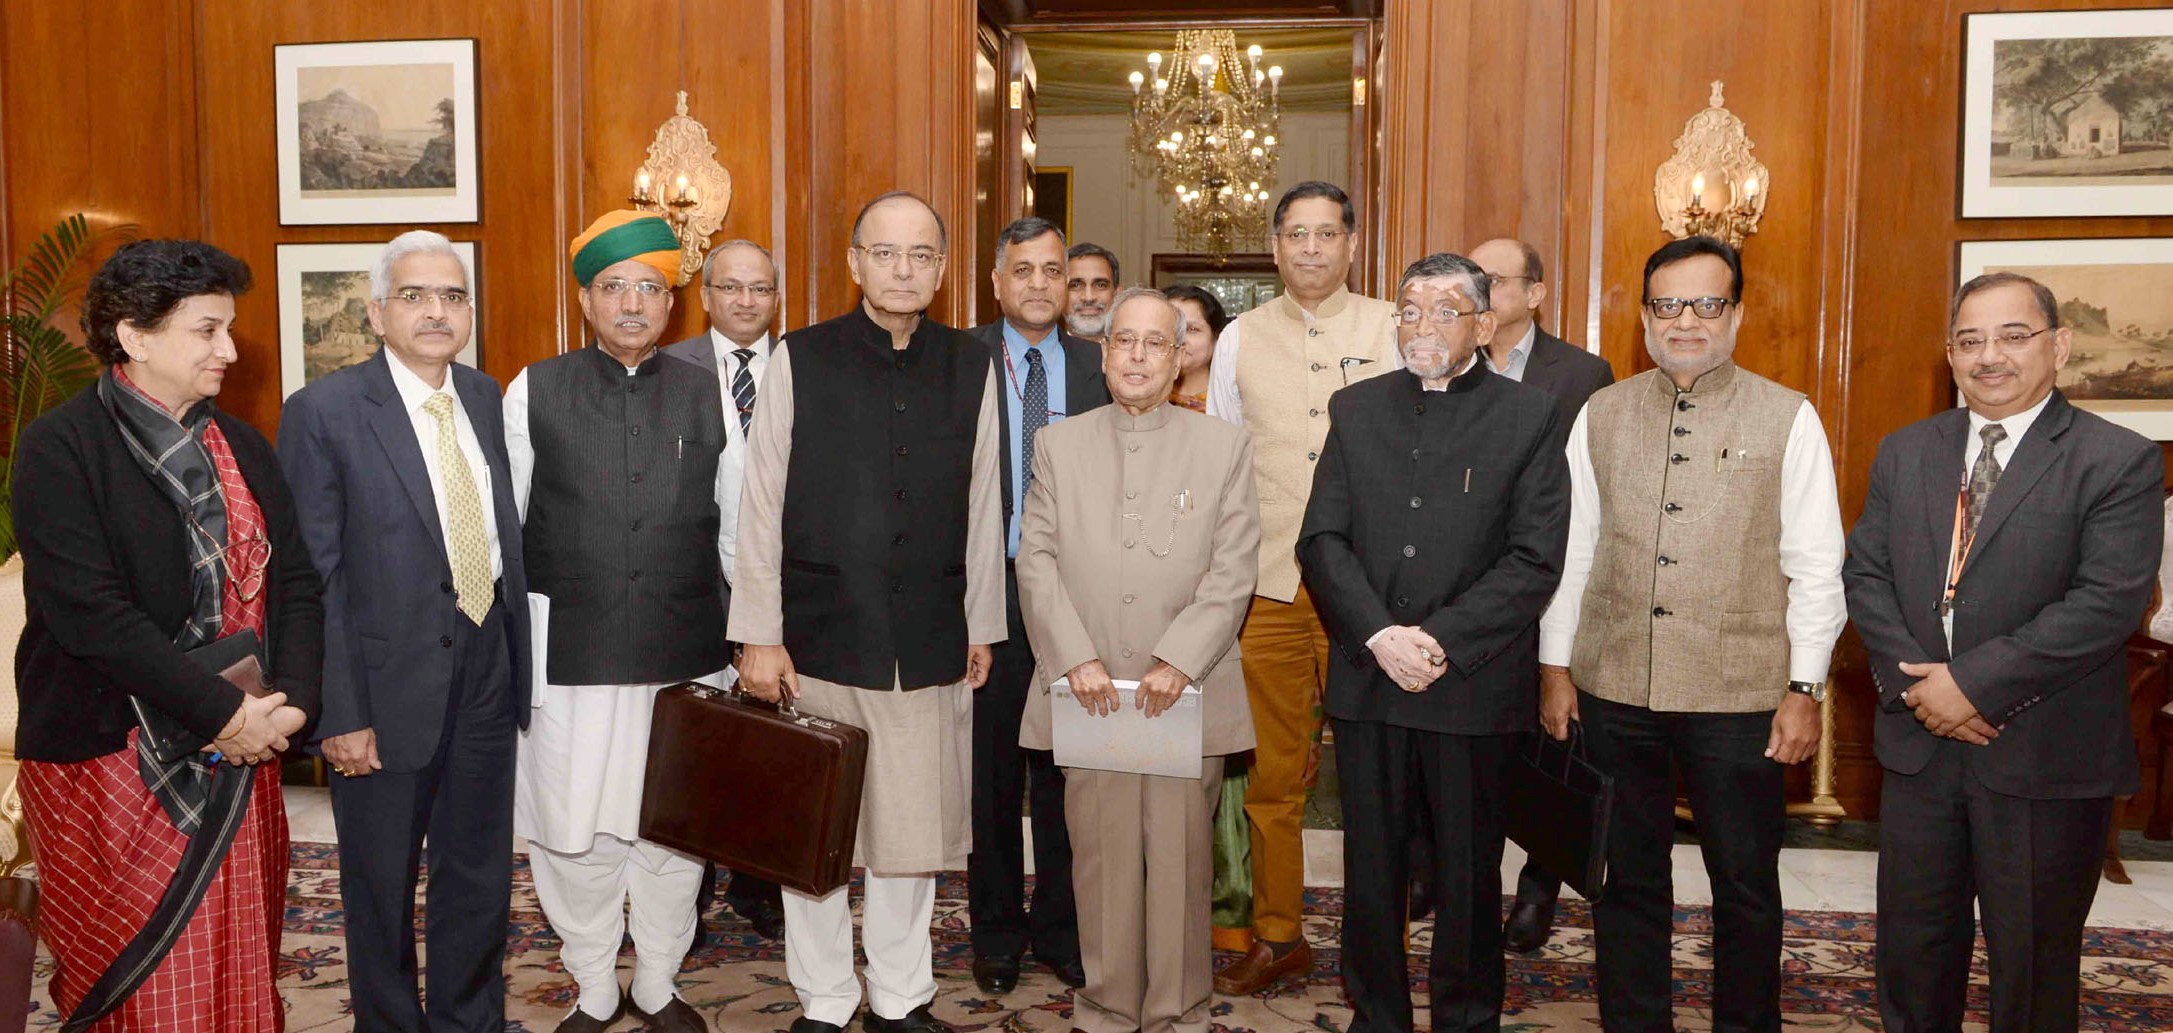 Union Minister for Finance and Corporate Affairs, Arun Jaitley, presenting the General Budget to the President, Pranab Mukherjee, on February 01, 2017.